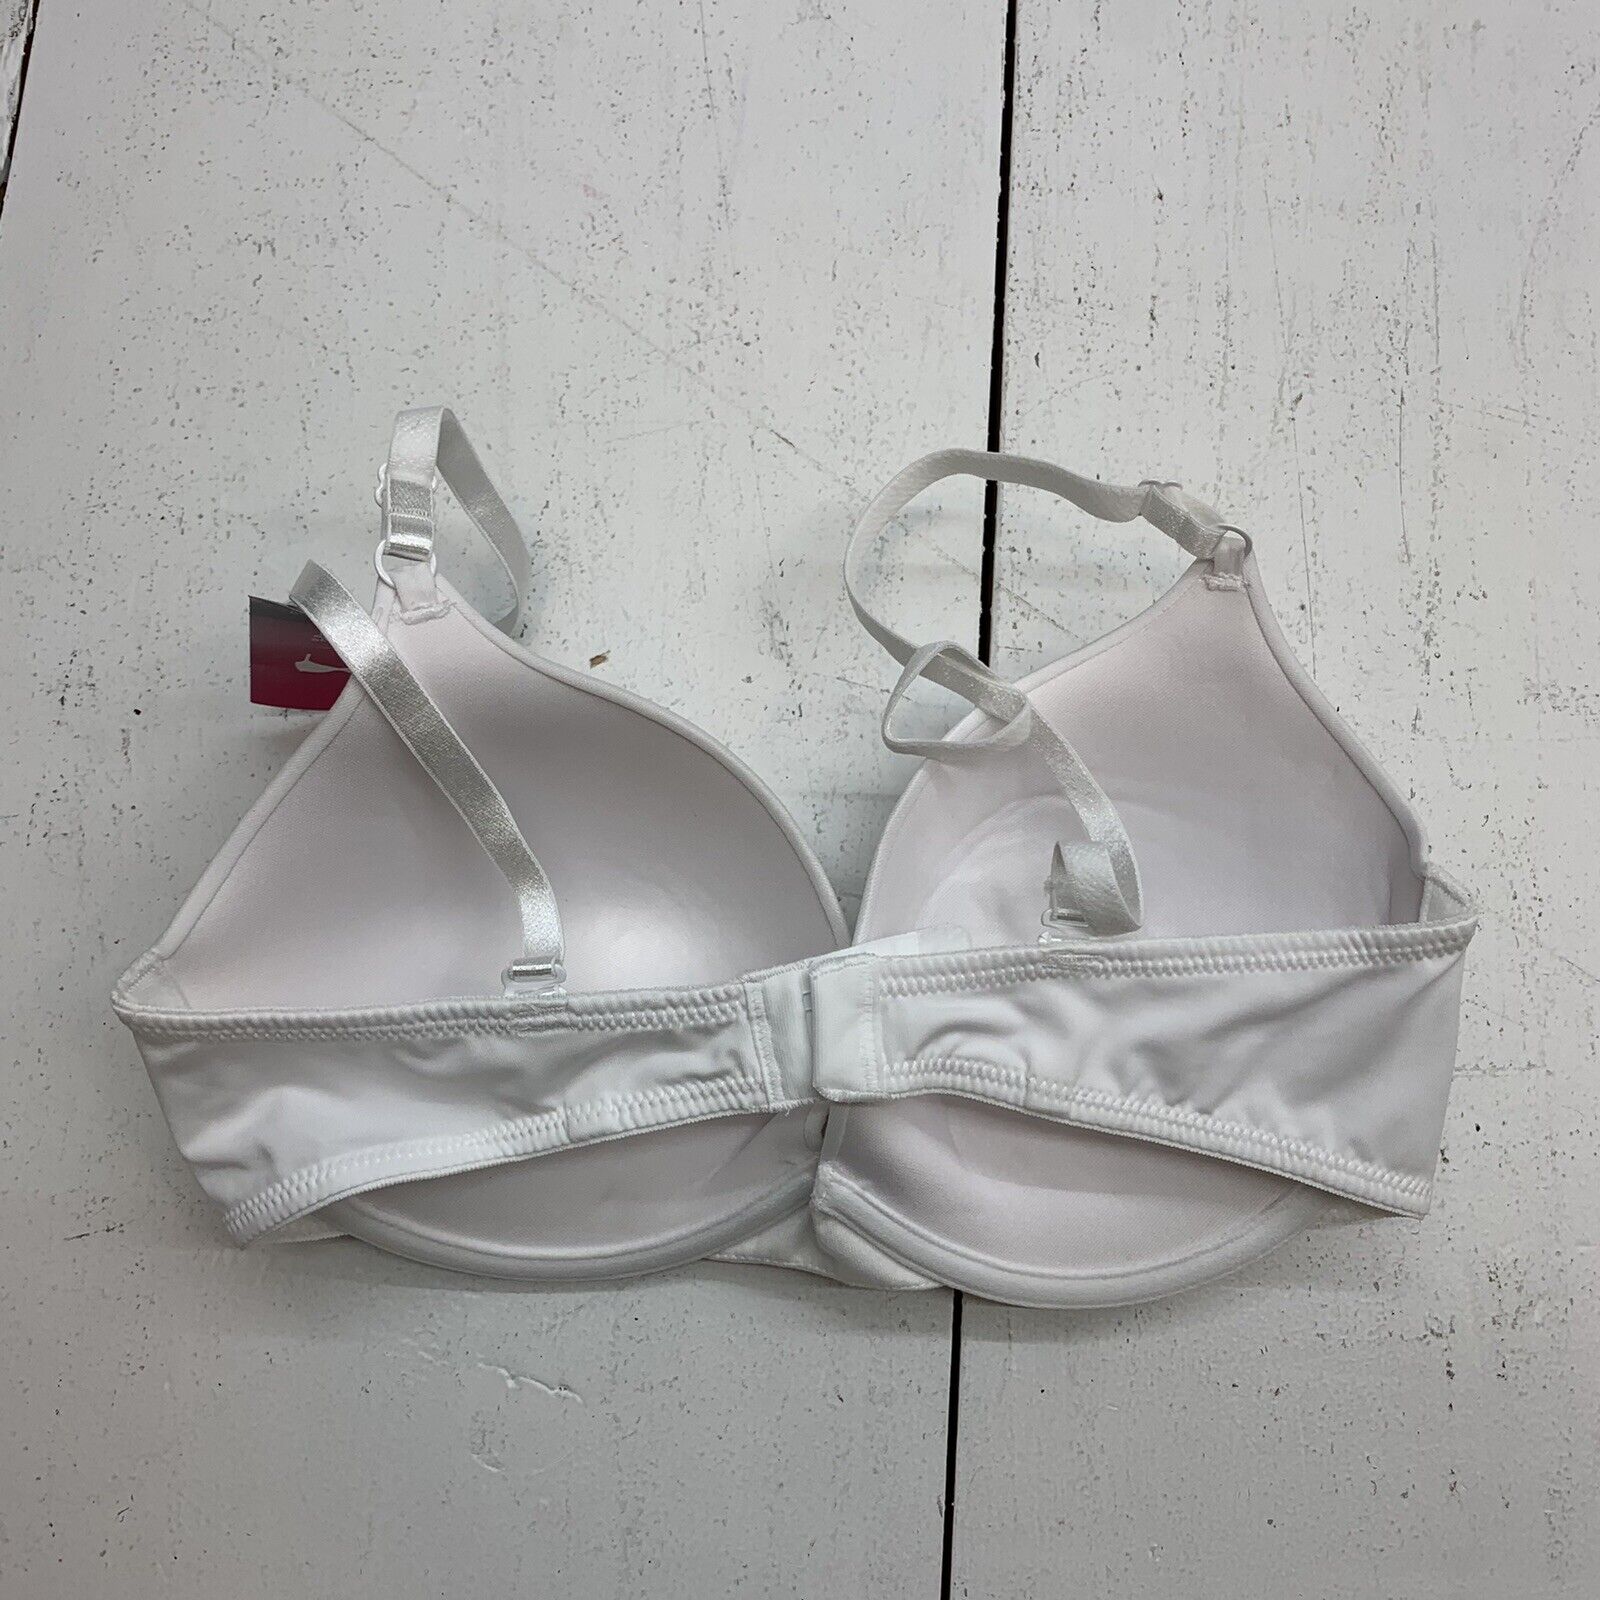 Maidenform 0428 White at  Women's Clothing store: Bras